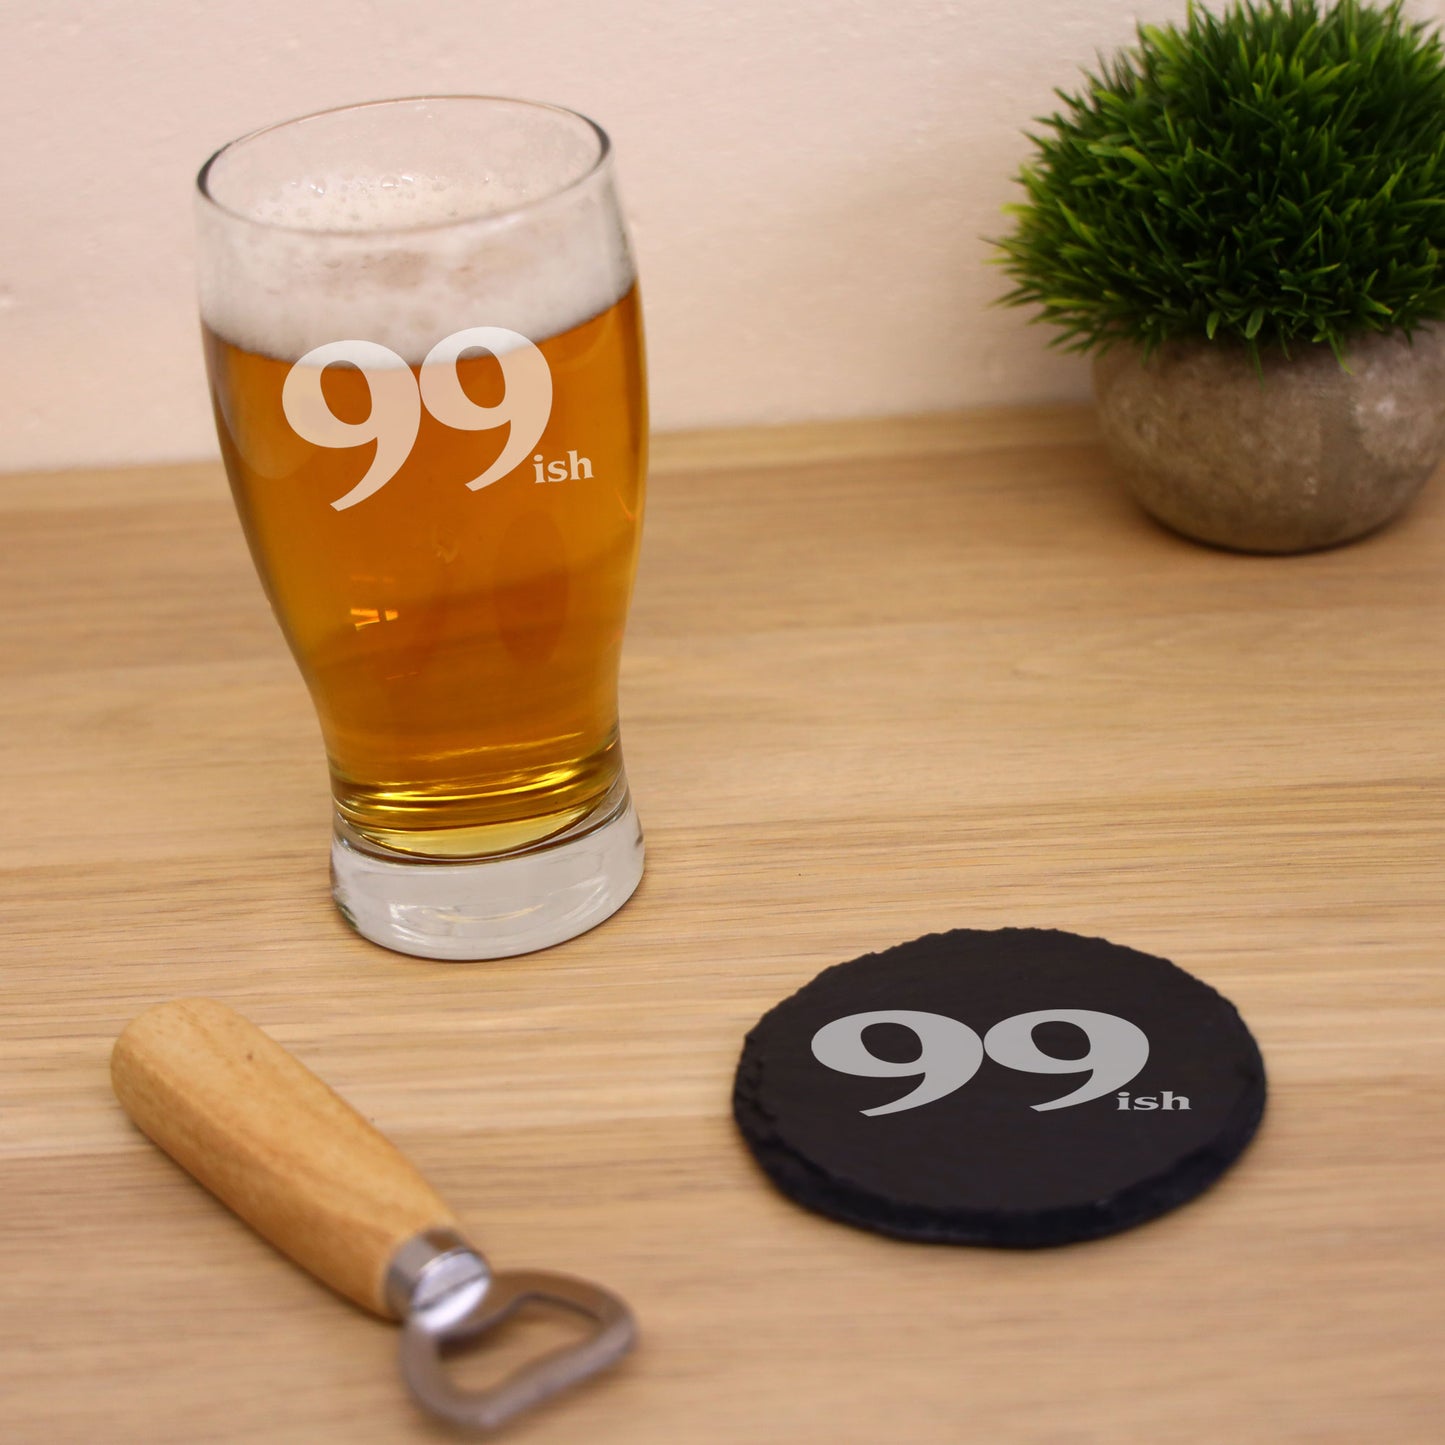 99ish Pint Glass and/or Coaster Set  - Always Looking Good - Glass & Round Coaster Set  